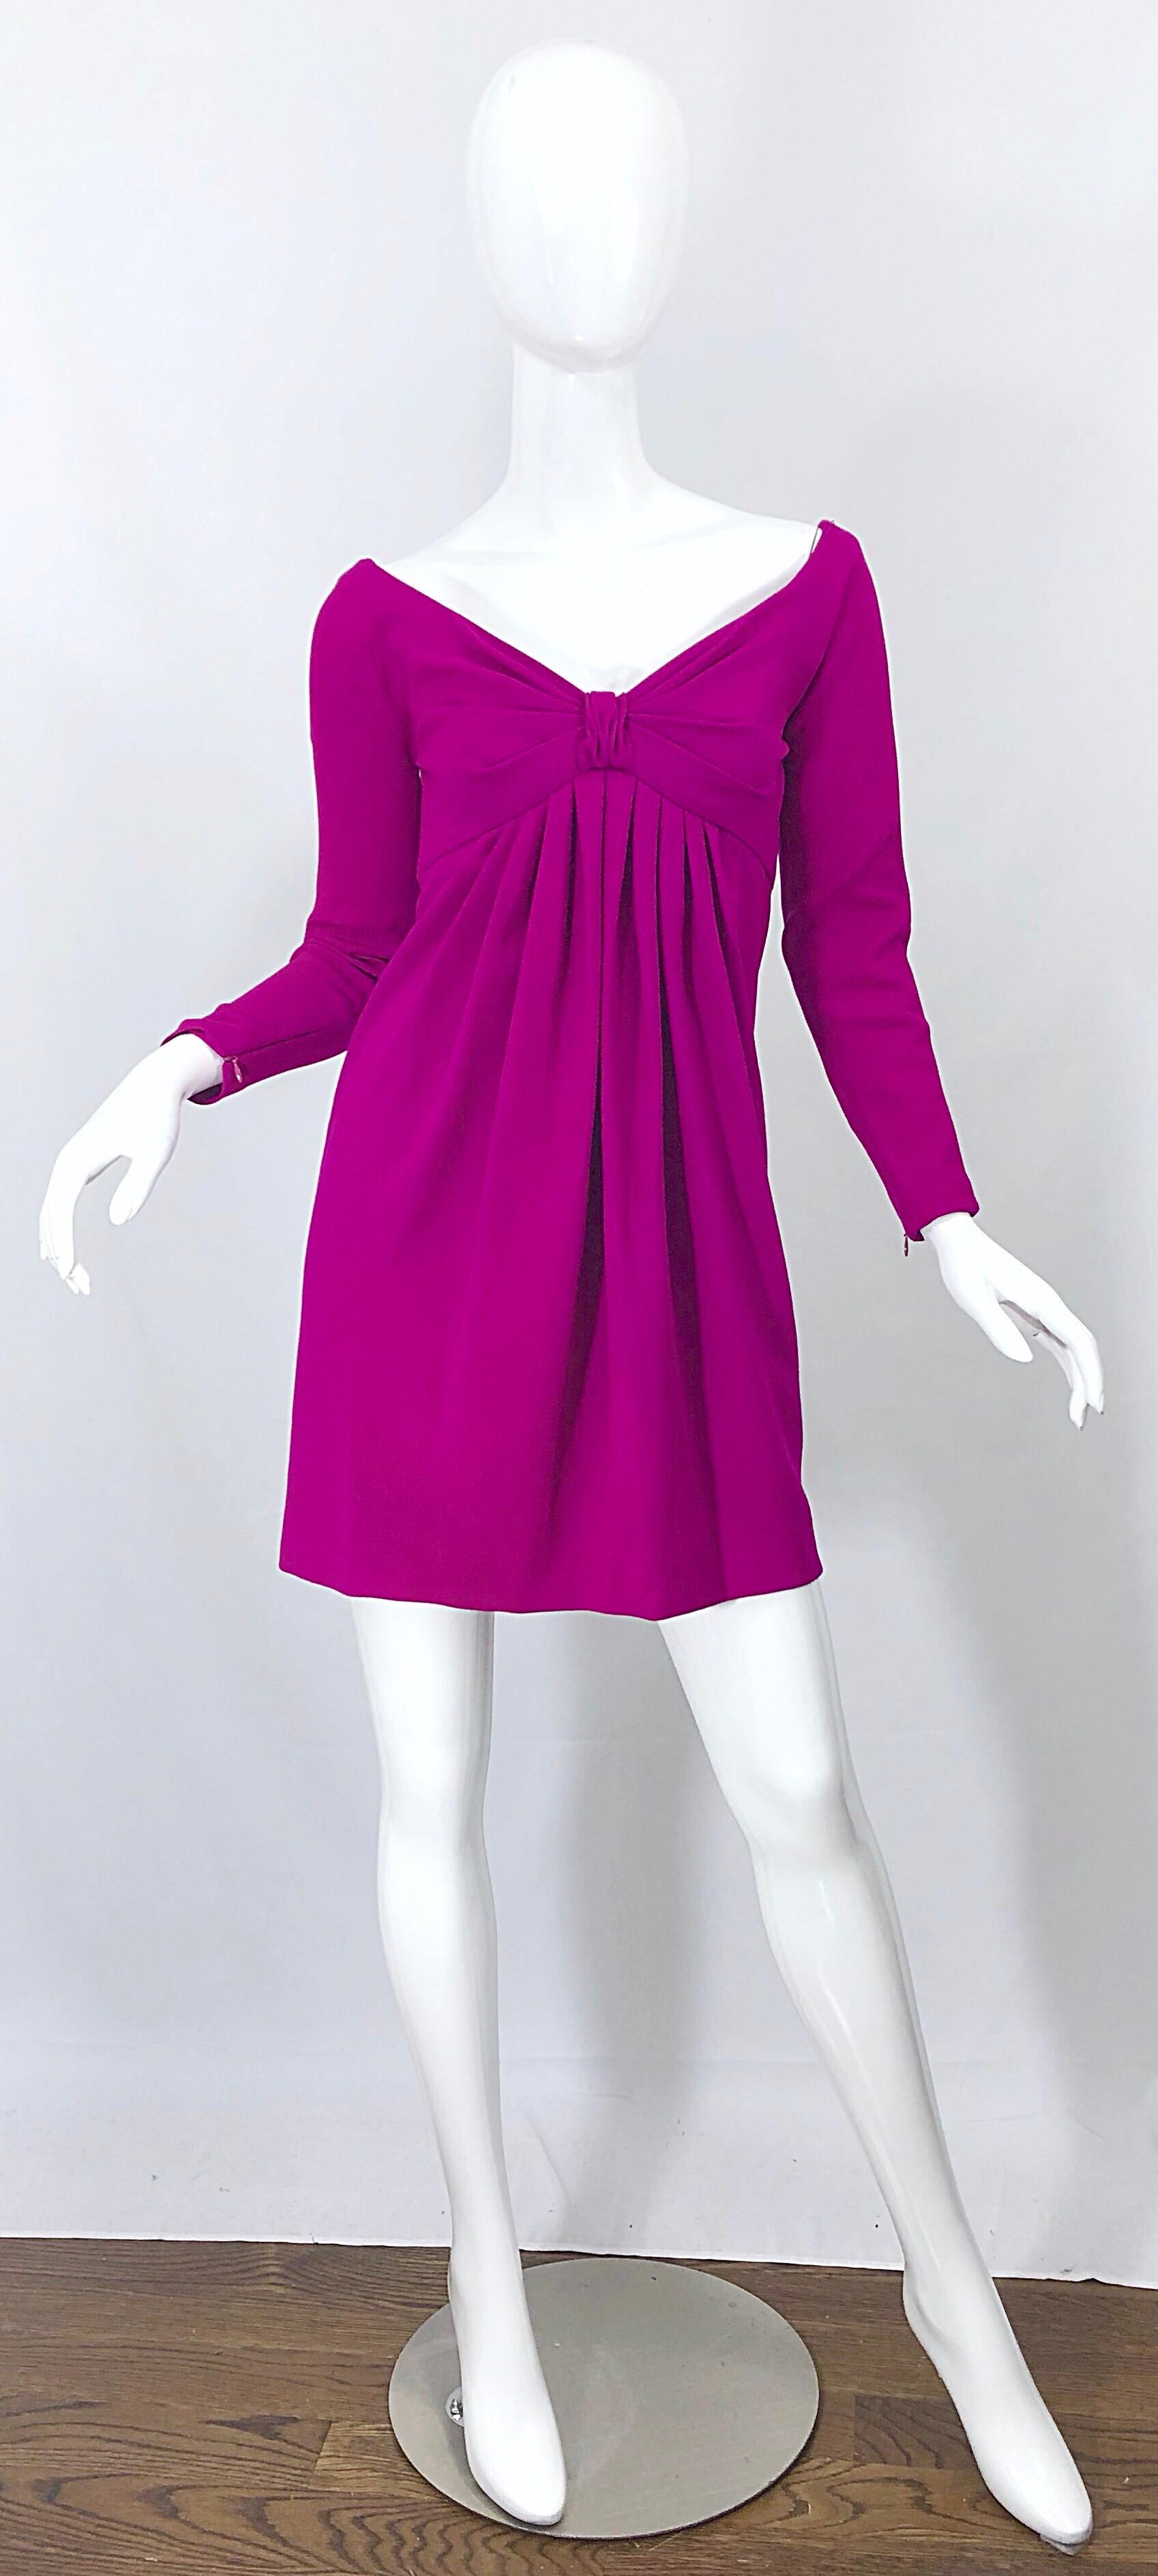 Chic vintage 90s CAROLYNE ROEHM for NEIMAN MARCUS fuchsia / hot pink long sleeve virgin wool mini empire dress! Sits slightly off the shoulder that exposes just the right amount of arms and neck. Features a fitted bodice with a forgiving empire